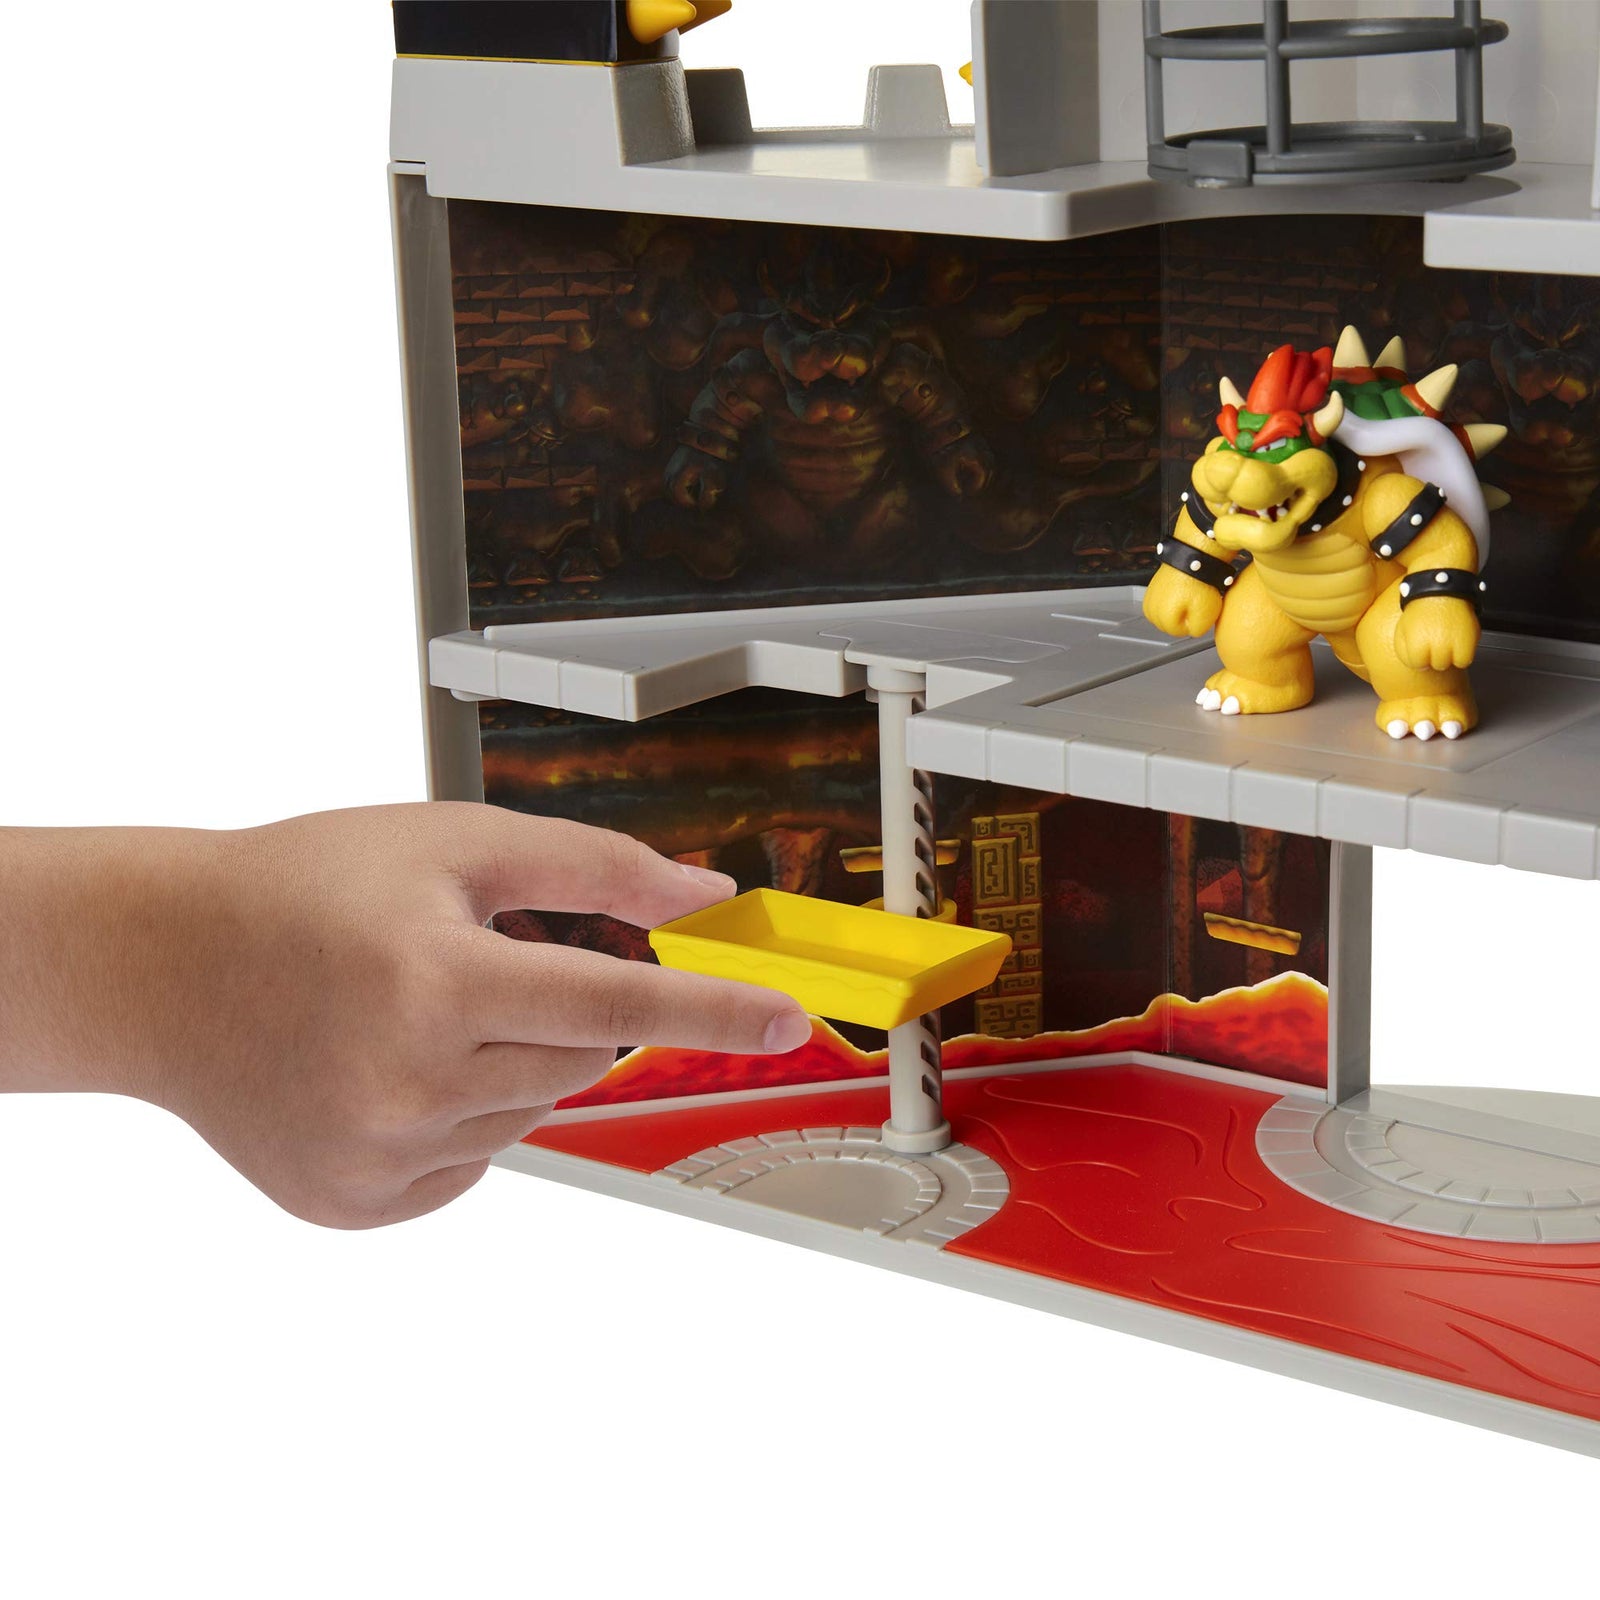 Super Mario 400204 Nintendo Bowser's Castle Super Mario Deluxe Bowser's Castle Playset with 2.5" Exclusive Articulated Bowser Action Figure, Interactive Play Set with Authentic In-Game Sounds